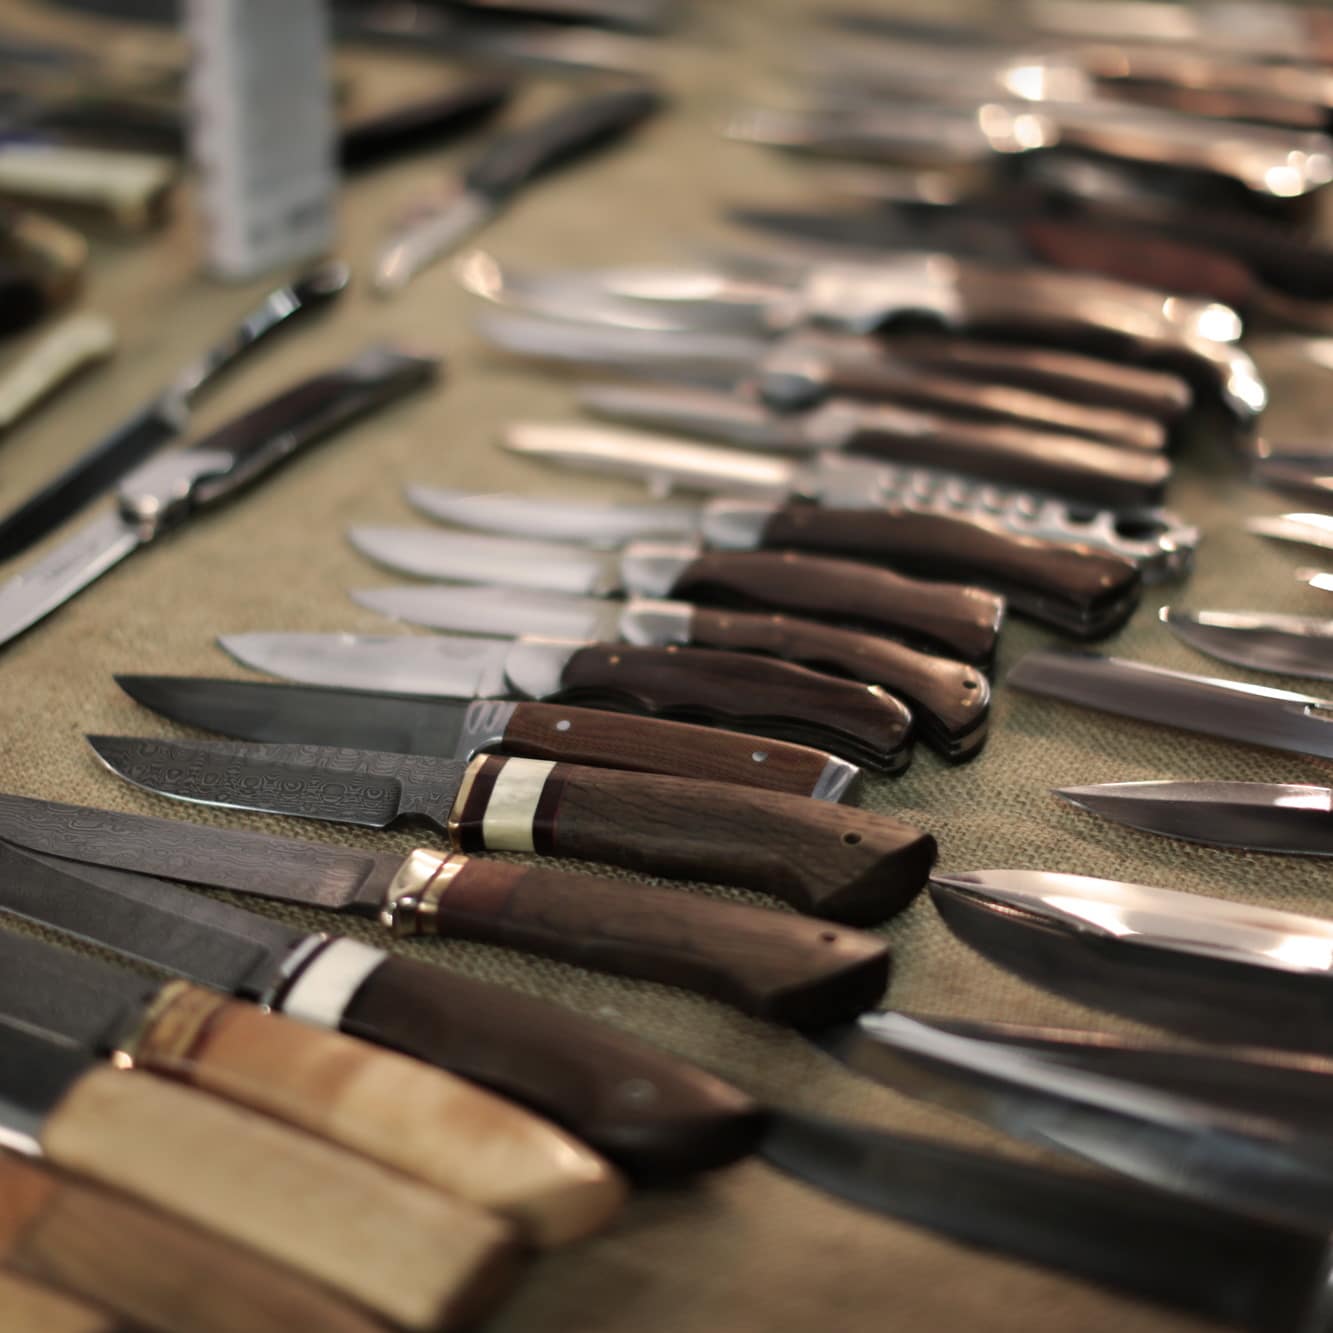 Updating My Kitchen With the Best Japanese Knives - City Girl Gone Mom